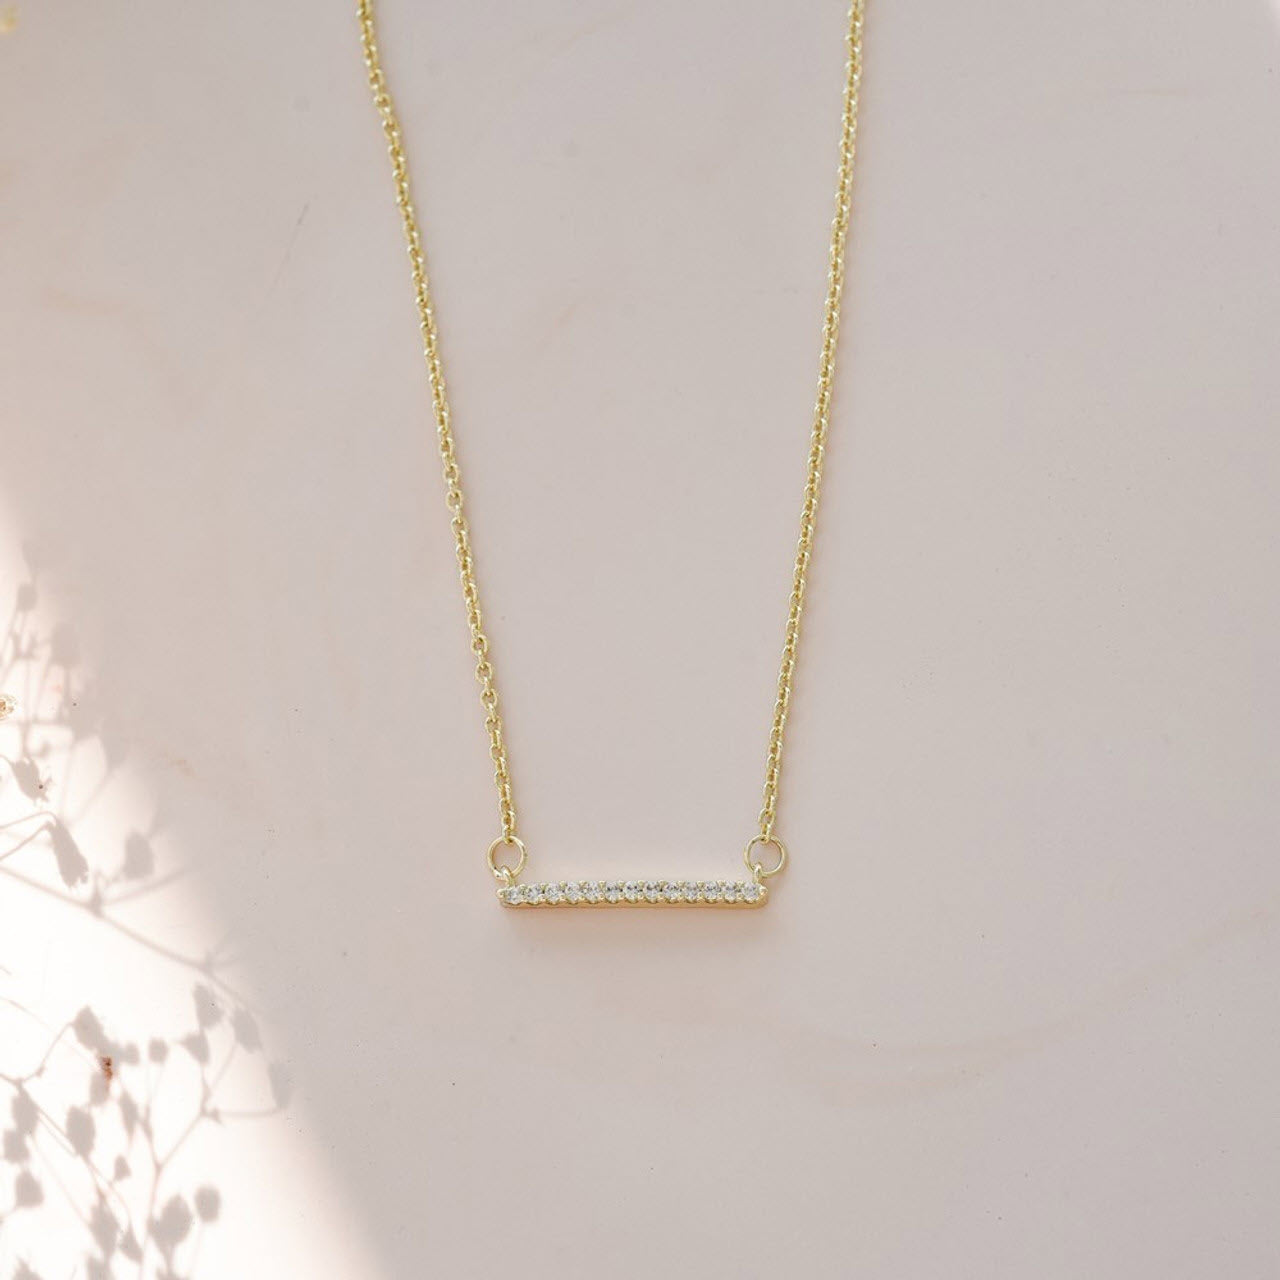 A delicate Glee gold necklace with an anti-tarnish horizontal bar pendant adorned with small crystals, displayed on a soft, shadowed background.